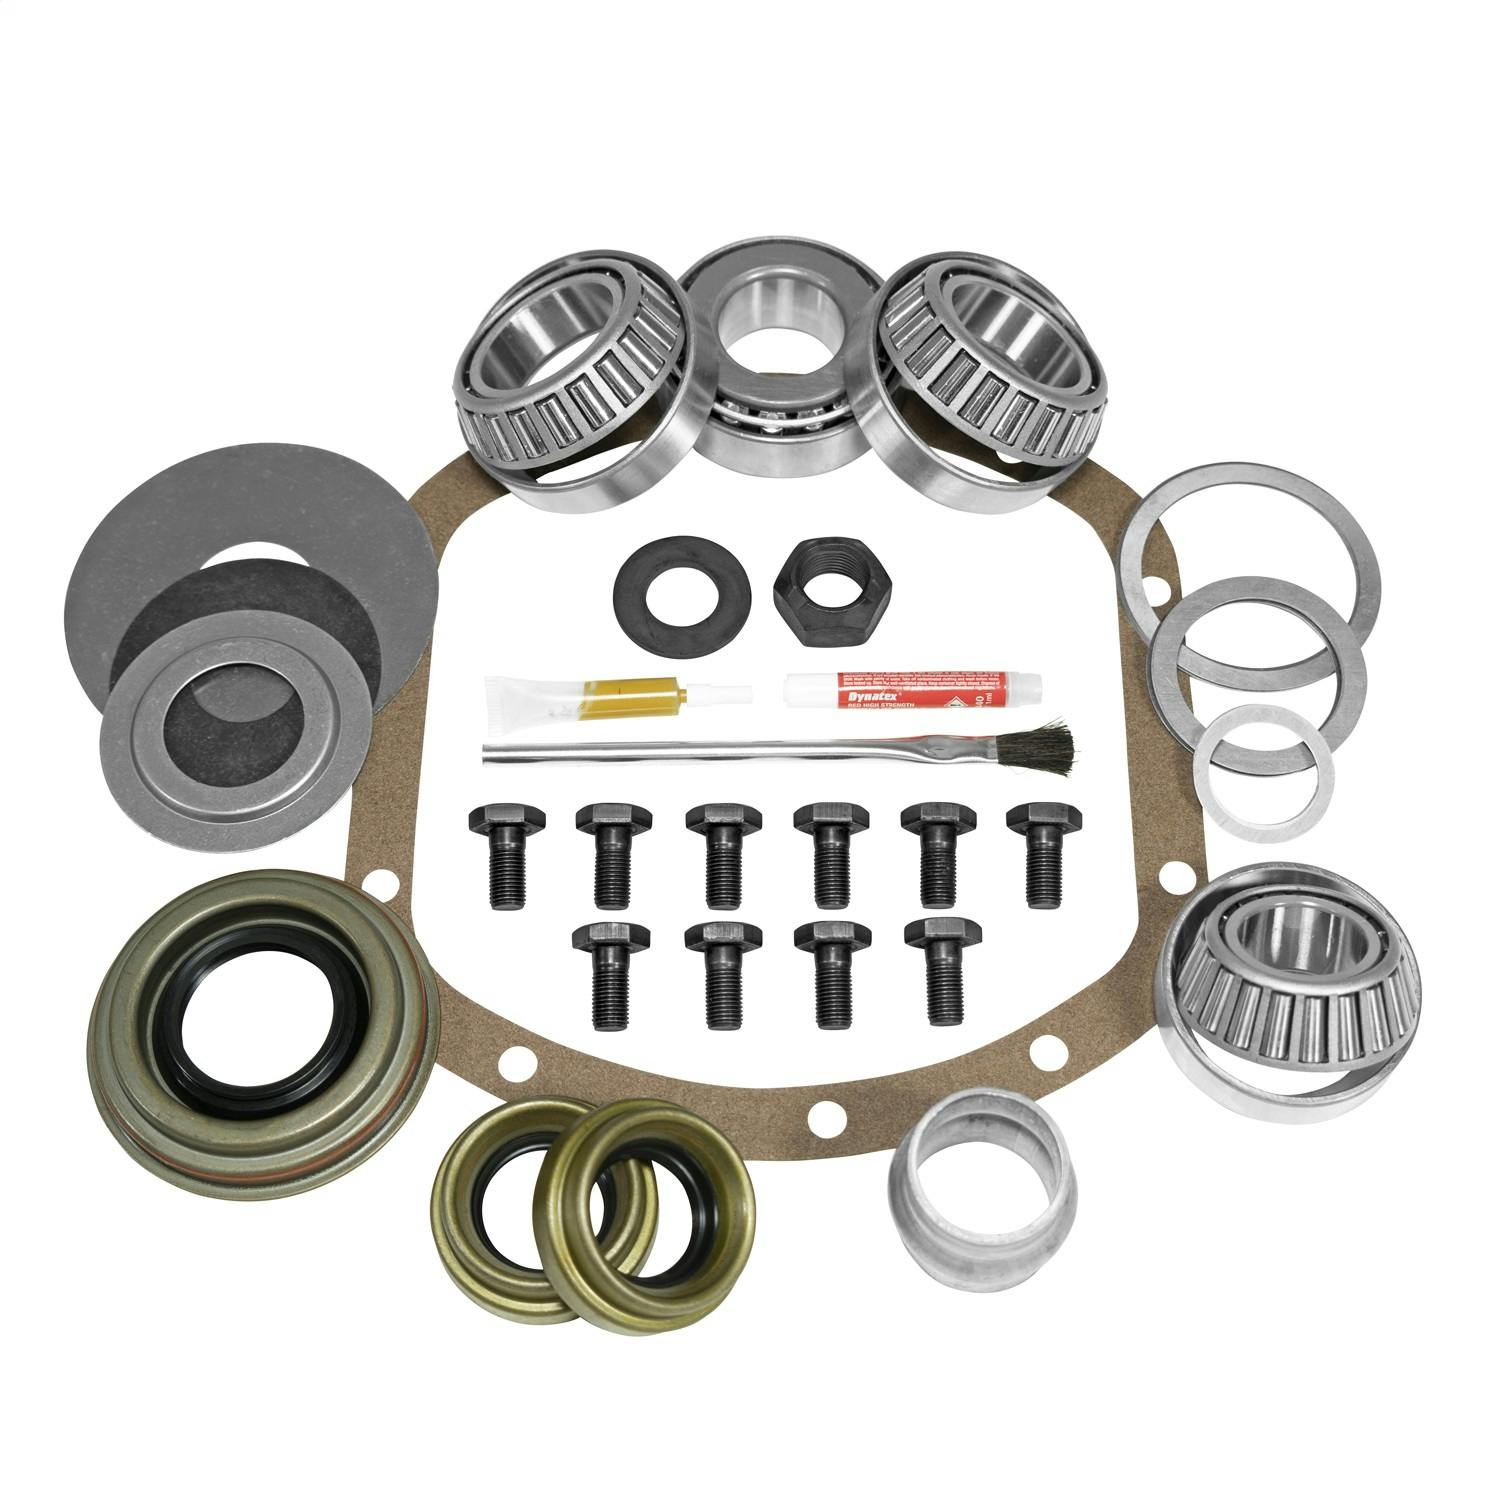 USA Standard Gear ZK D30-SUP-FORD Differential Rebuild Kit